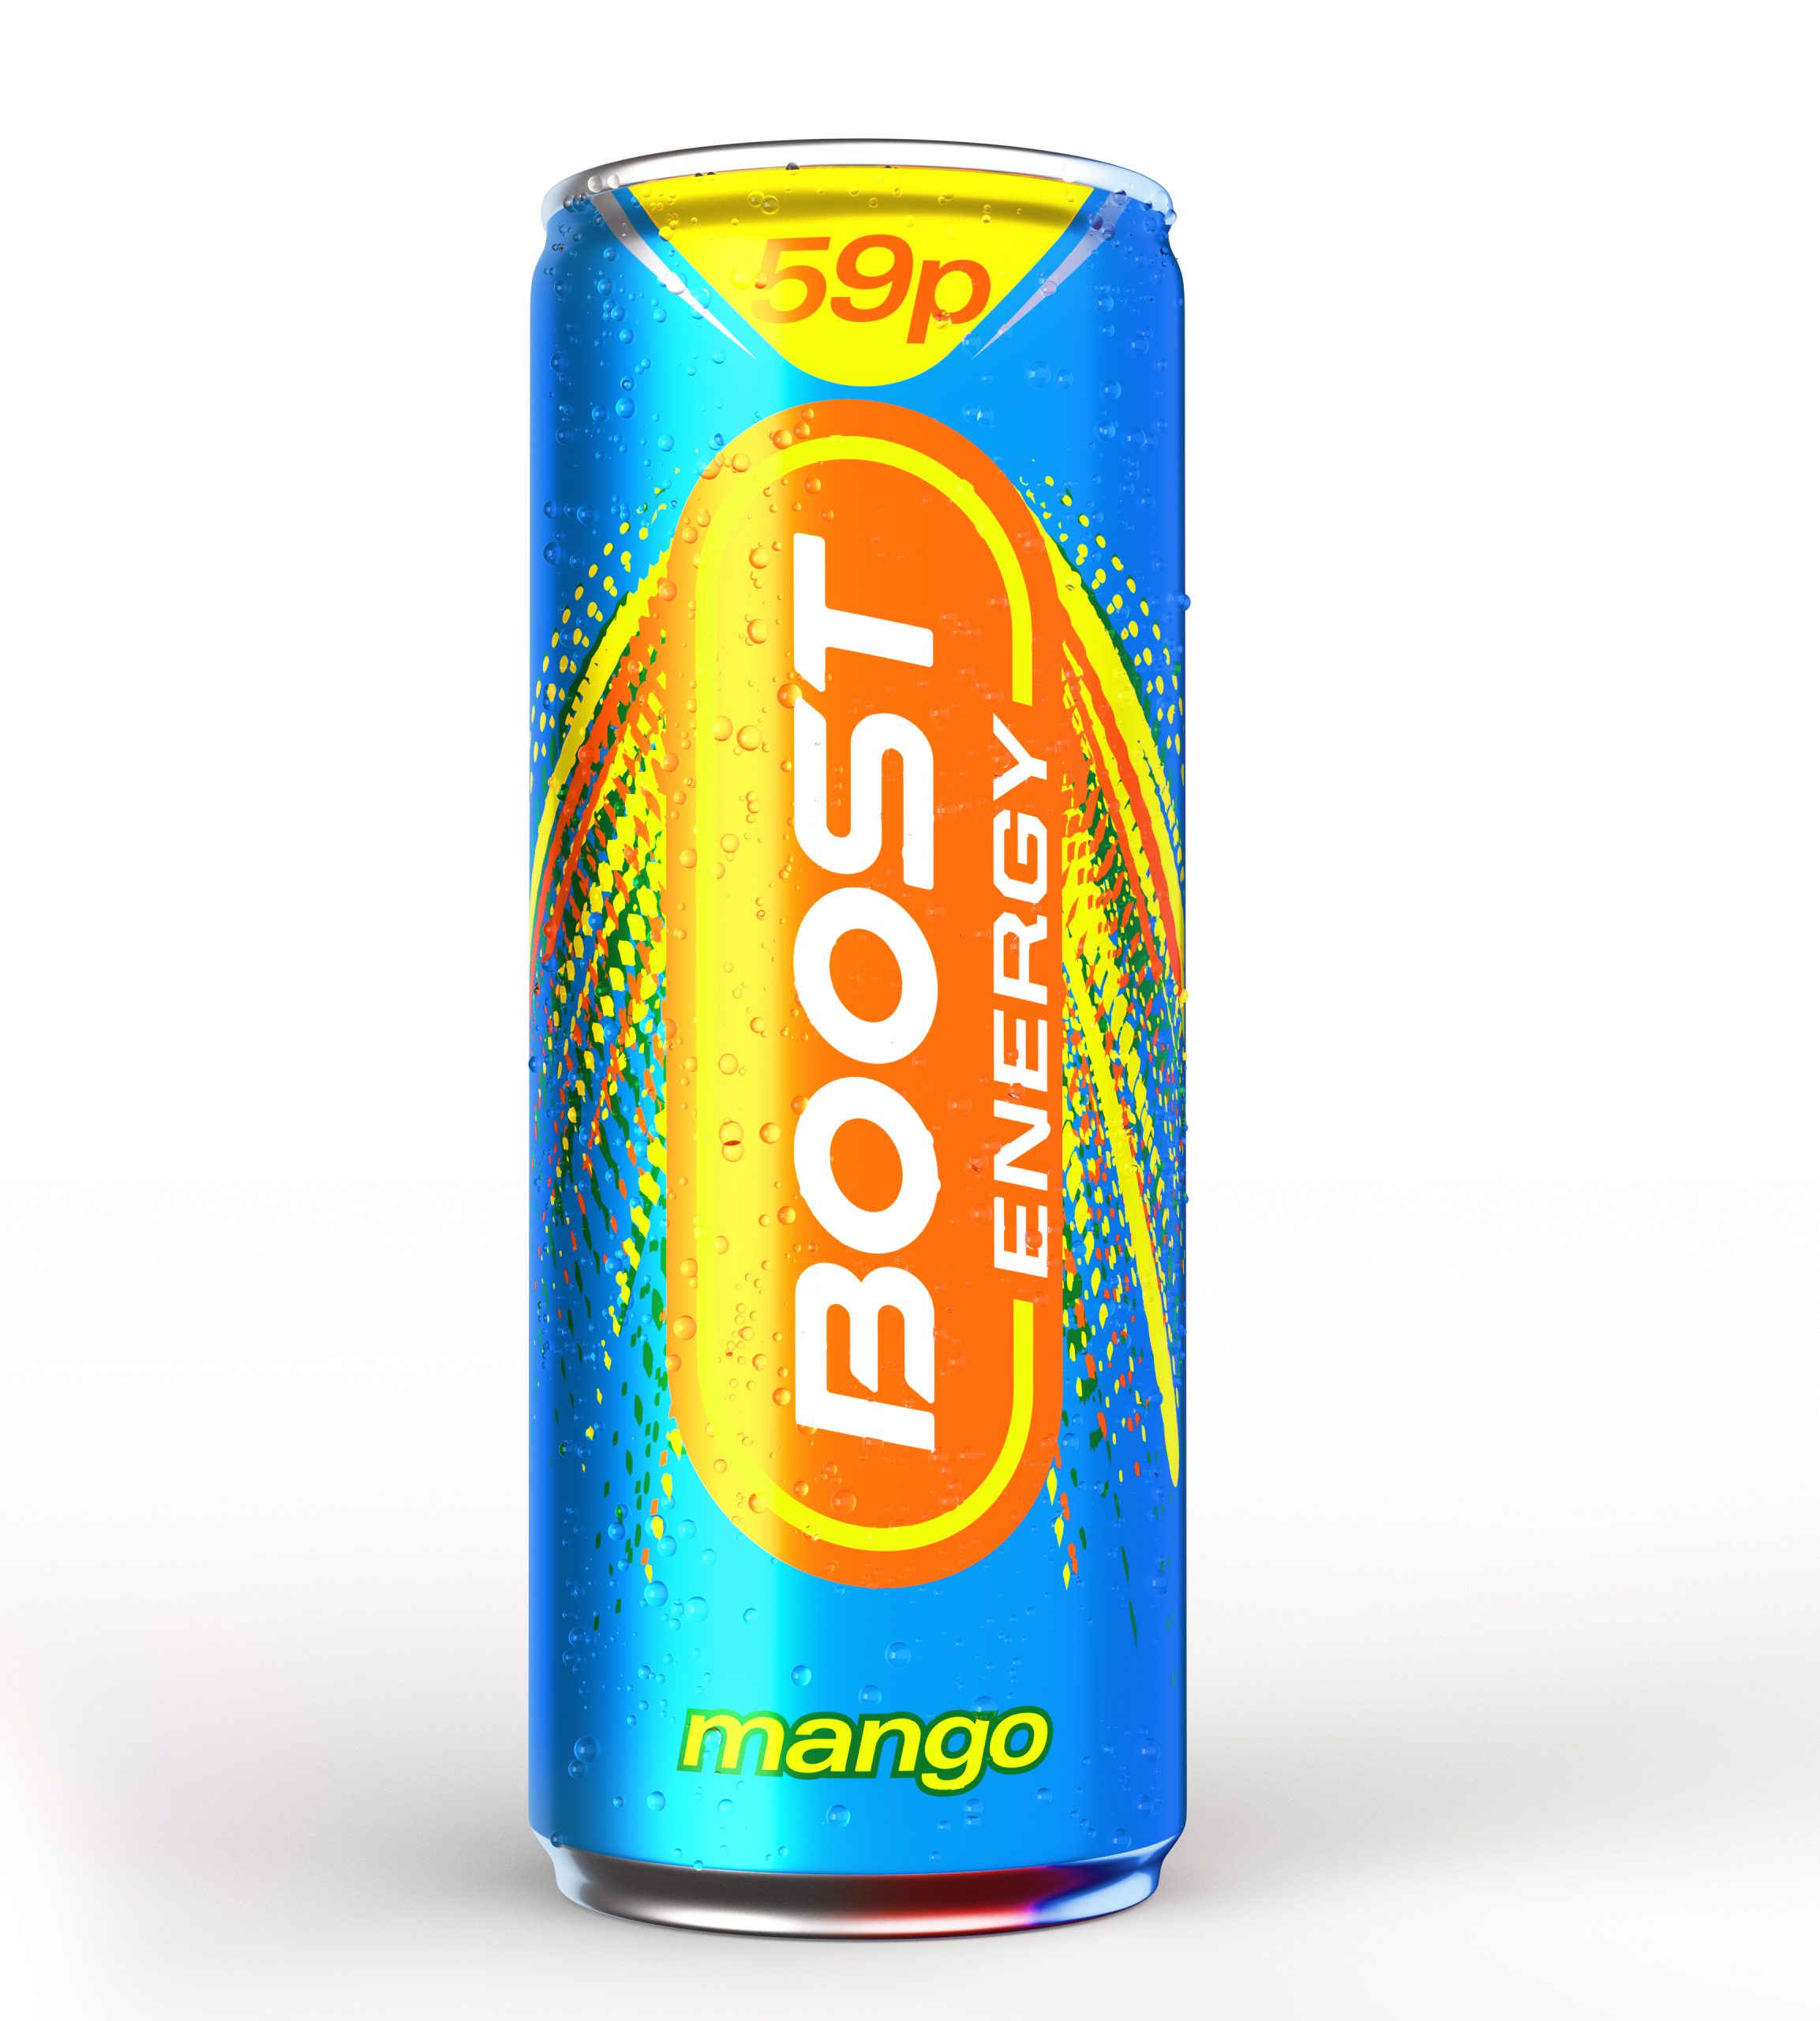 Boost Drinks adds new Mango flavour to Energy range